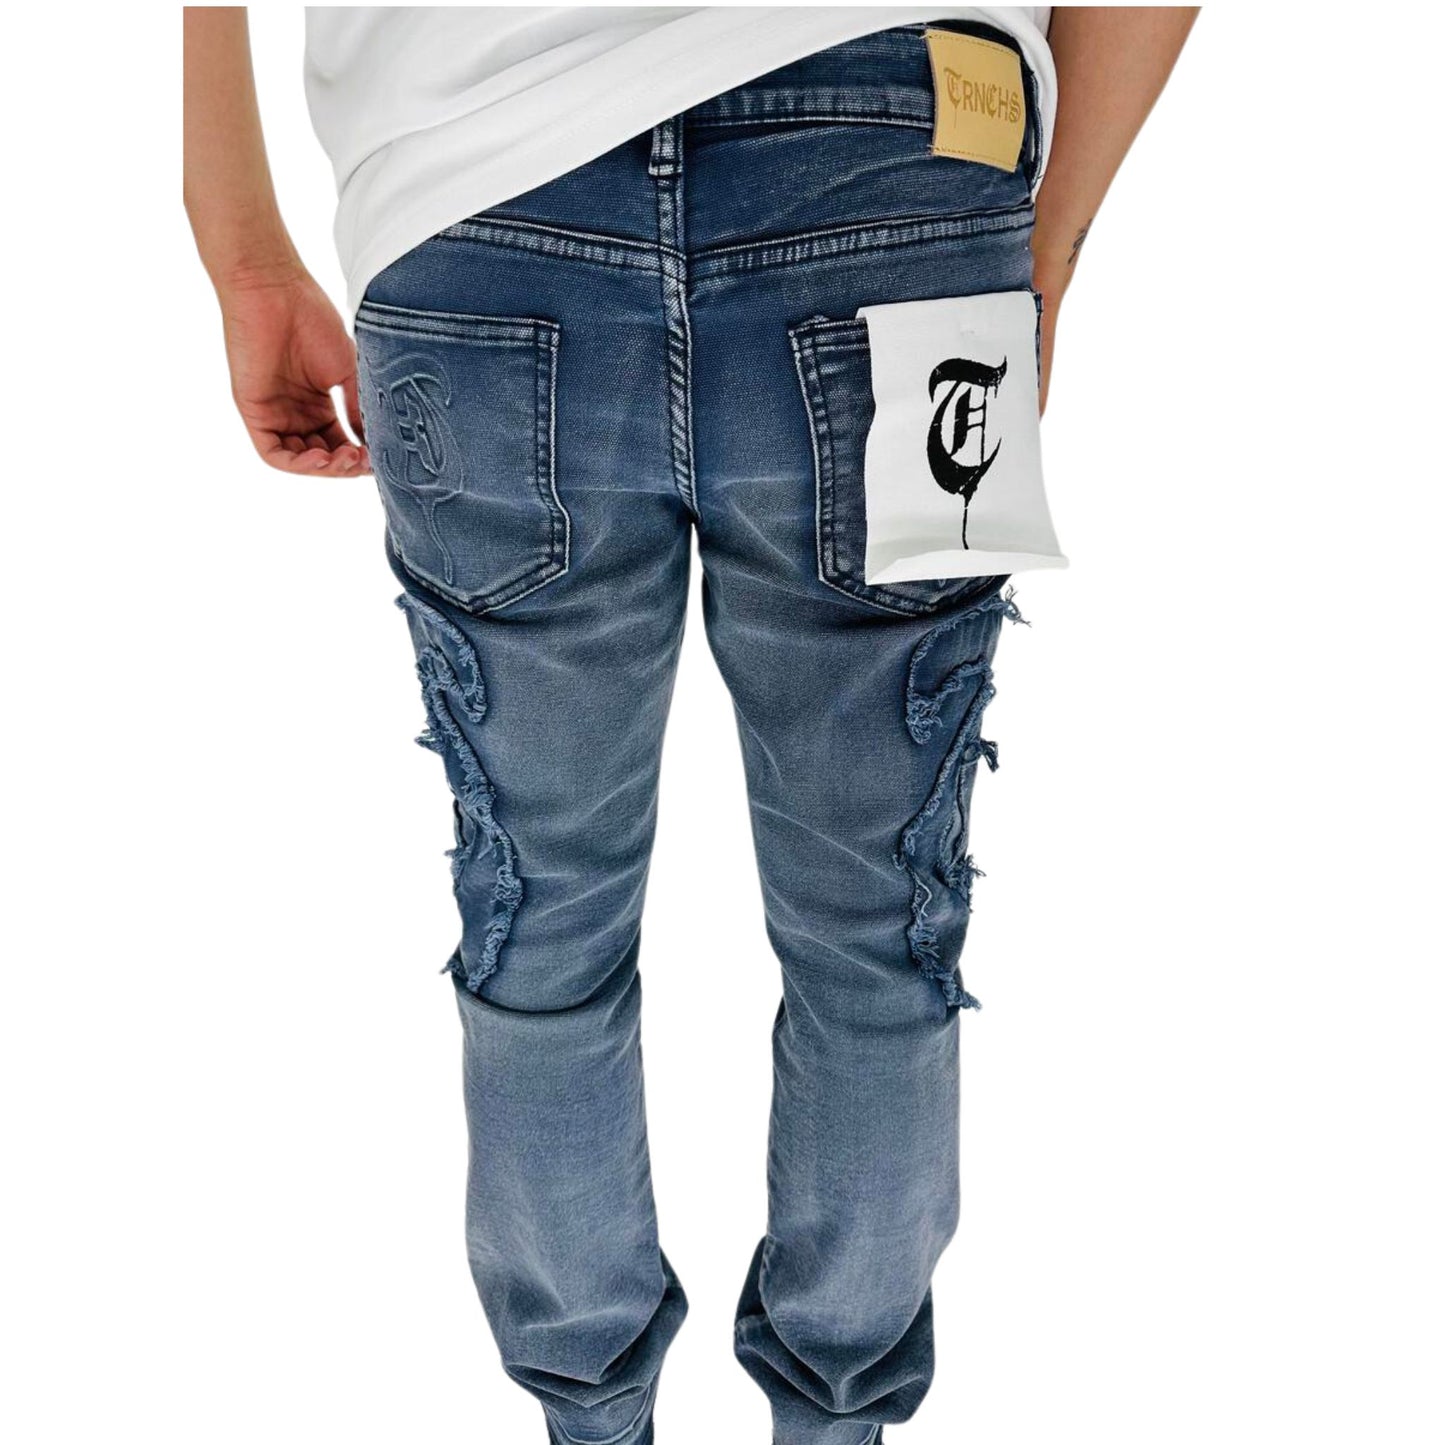 TRNCHS CANVAS STACKED JEANS